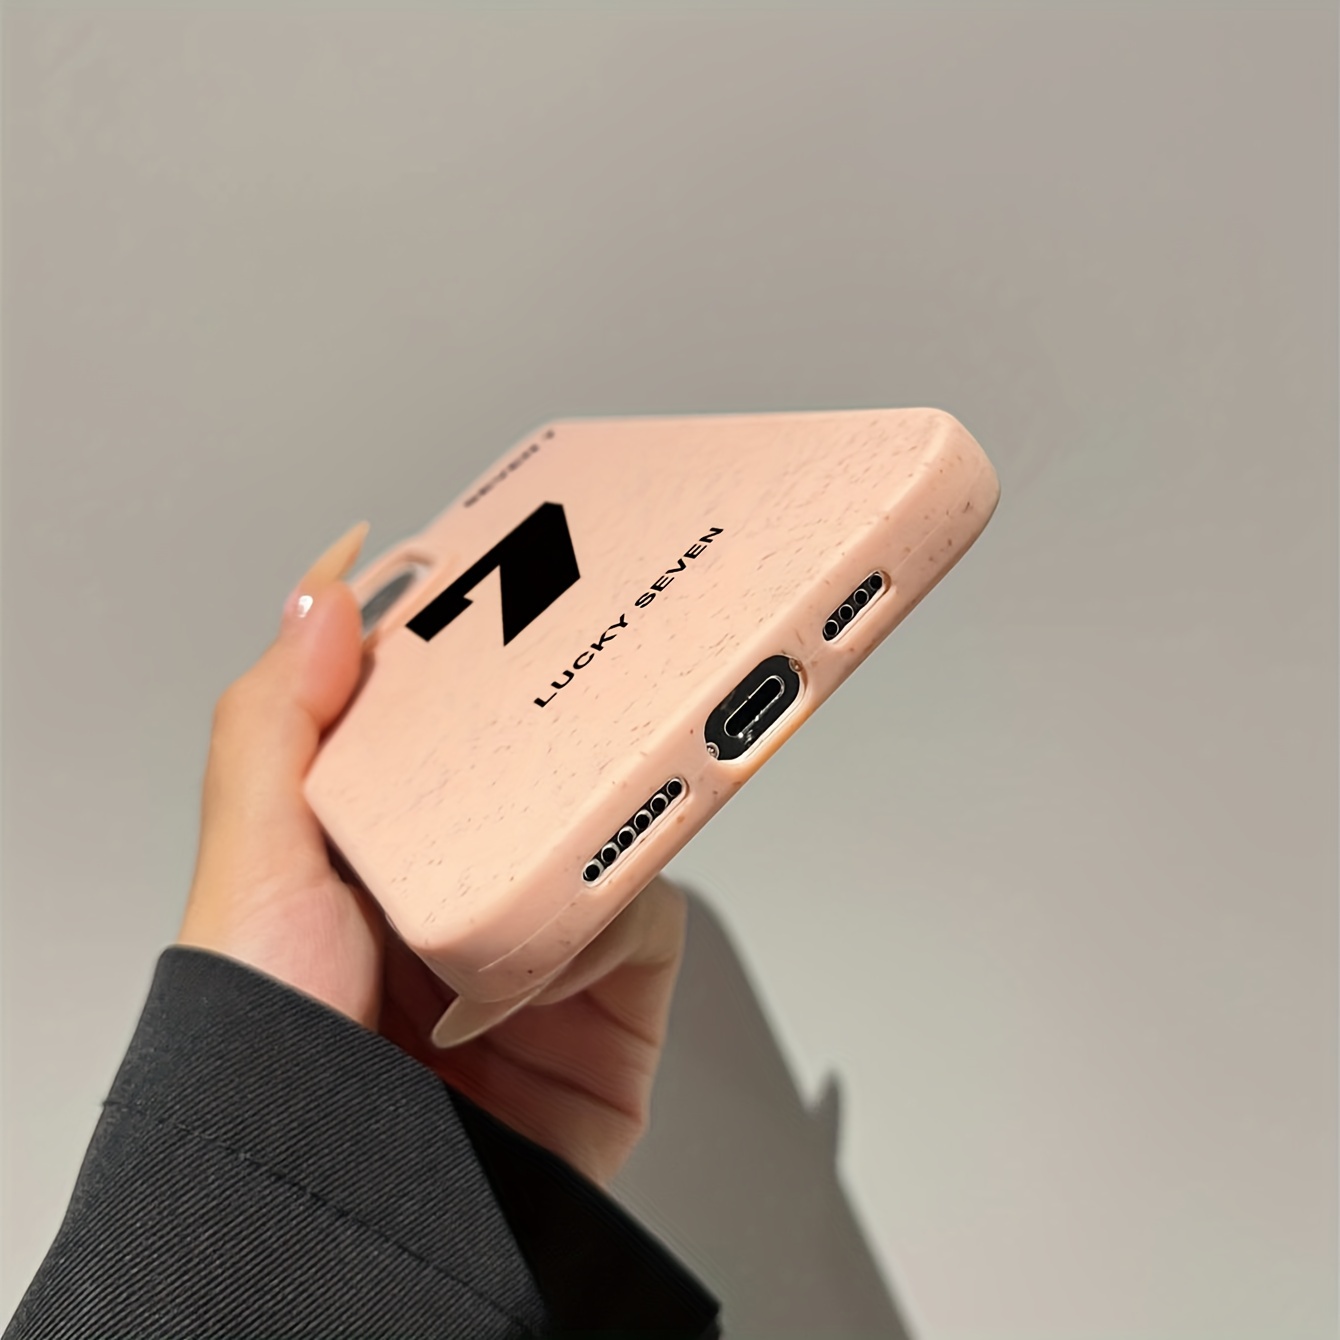 For Apple Iphone 13 Pro Max 12 Pro Max 11 Pro Max XR XS Max X 7 Plus 8 Plus Iphone  14 Pro Max 14 Plus Luxury Fashion Alphabet Electroplate Phone Case